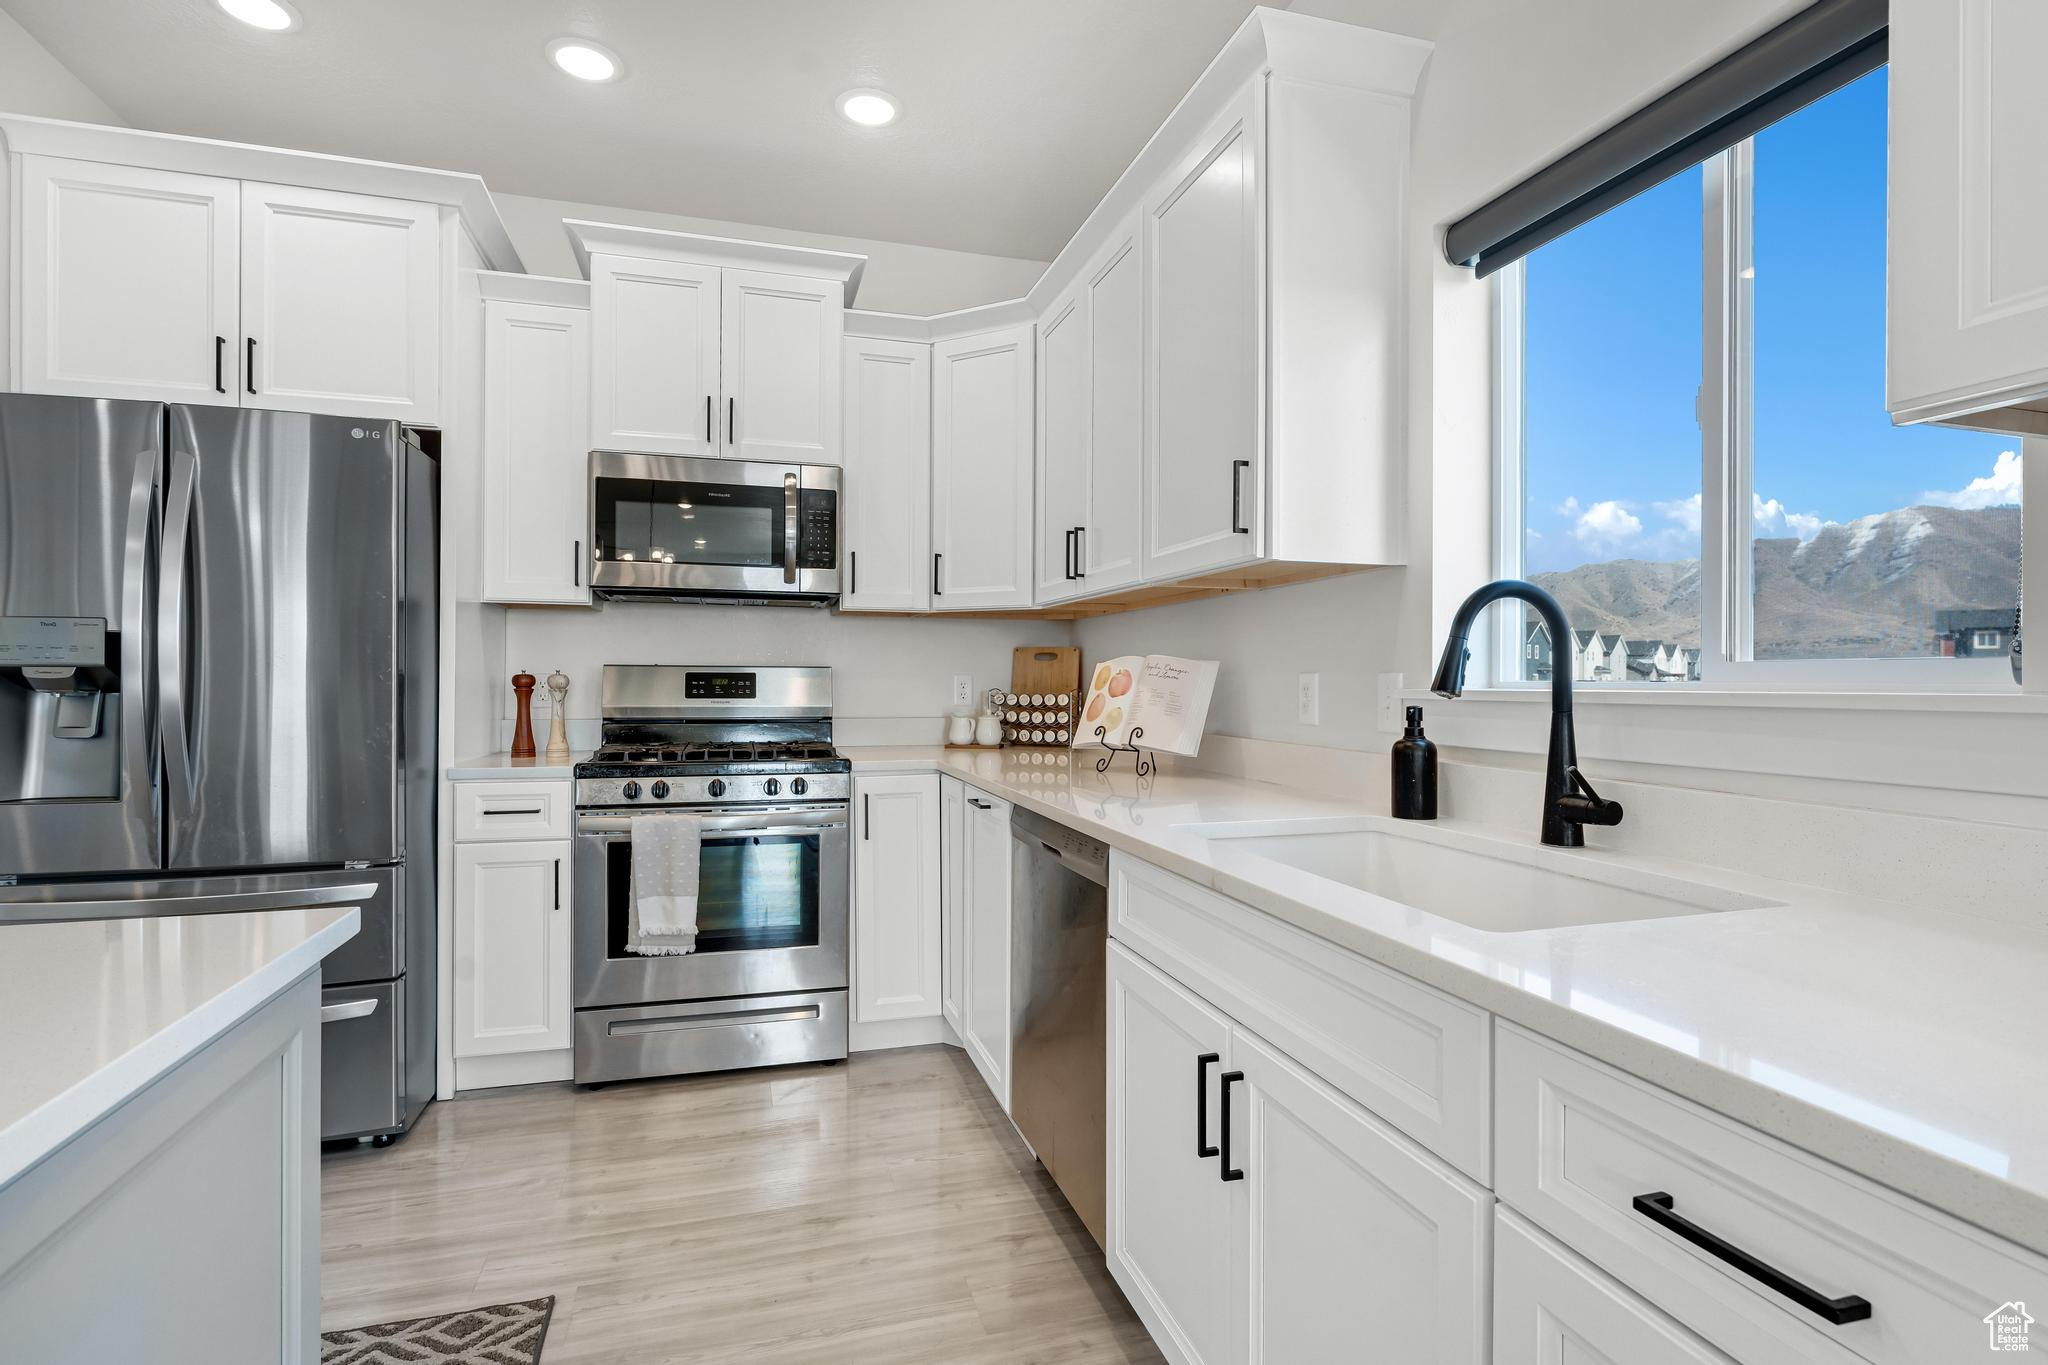 Kitchen Featuring Quartz Countertops, Upgraded  Lighting and Fixtures, Stainless Appliances